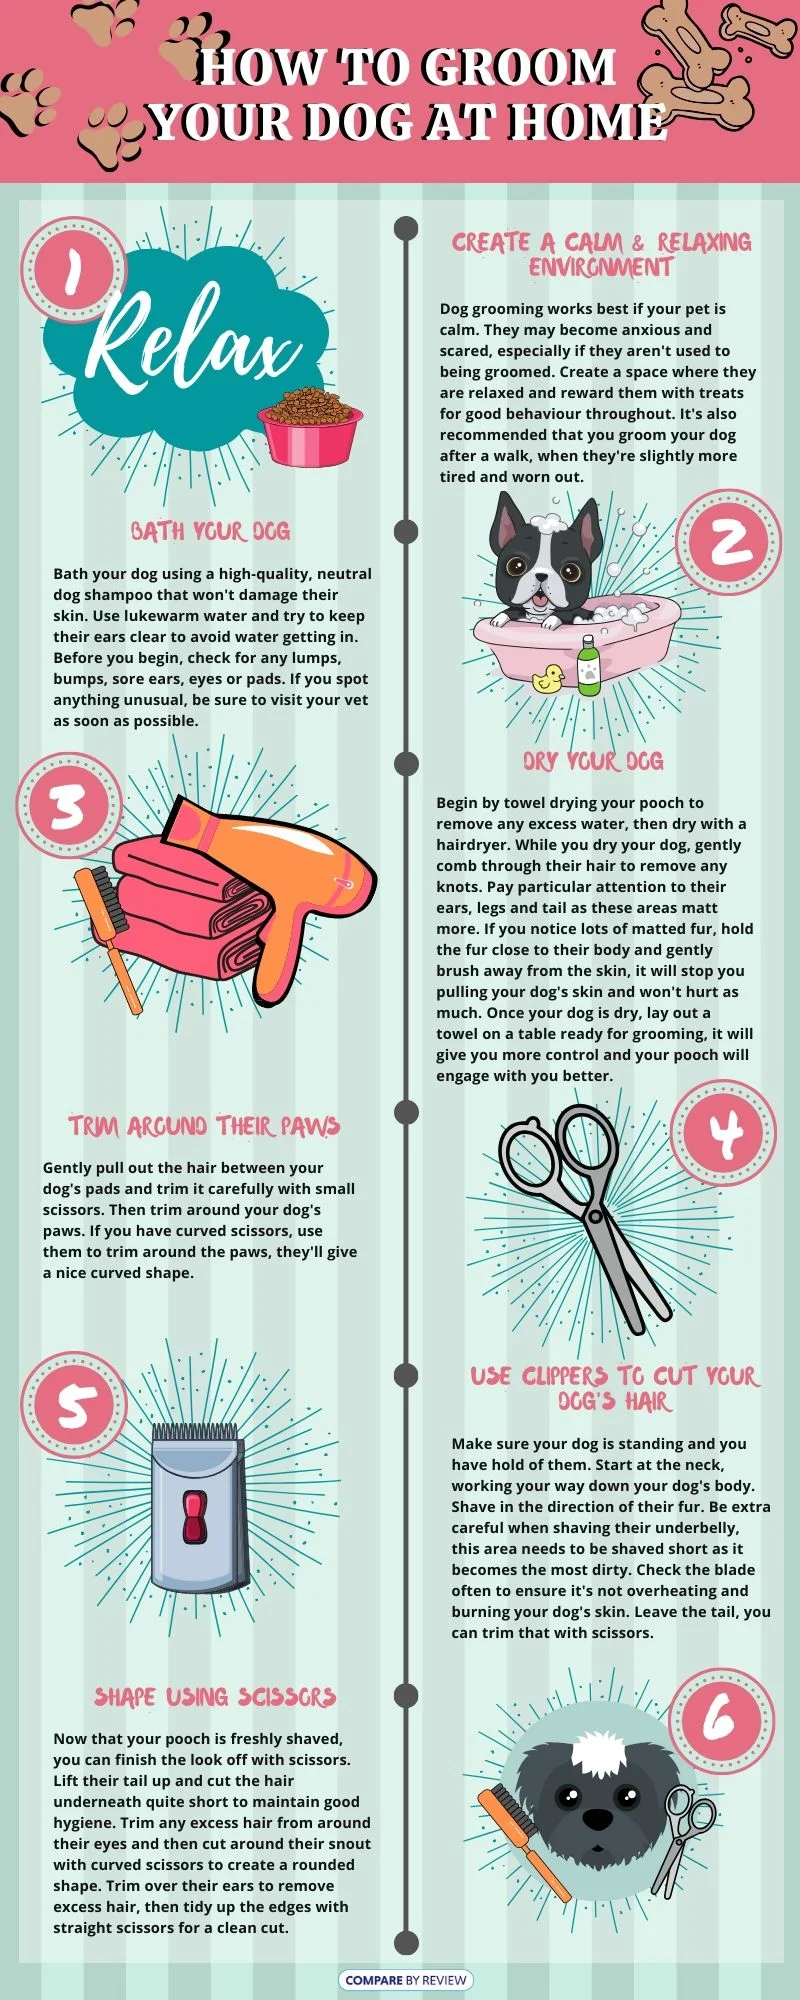 what are the best scissors for dog grooming